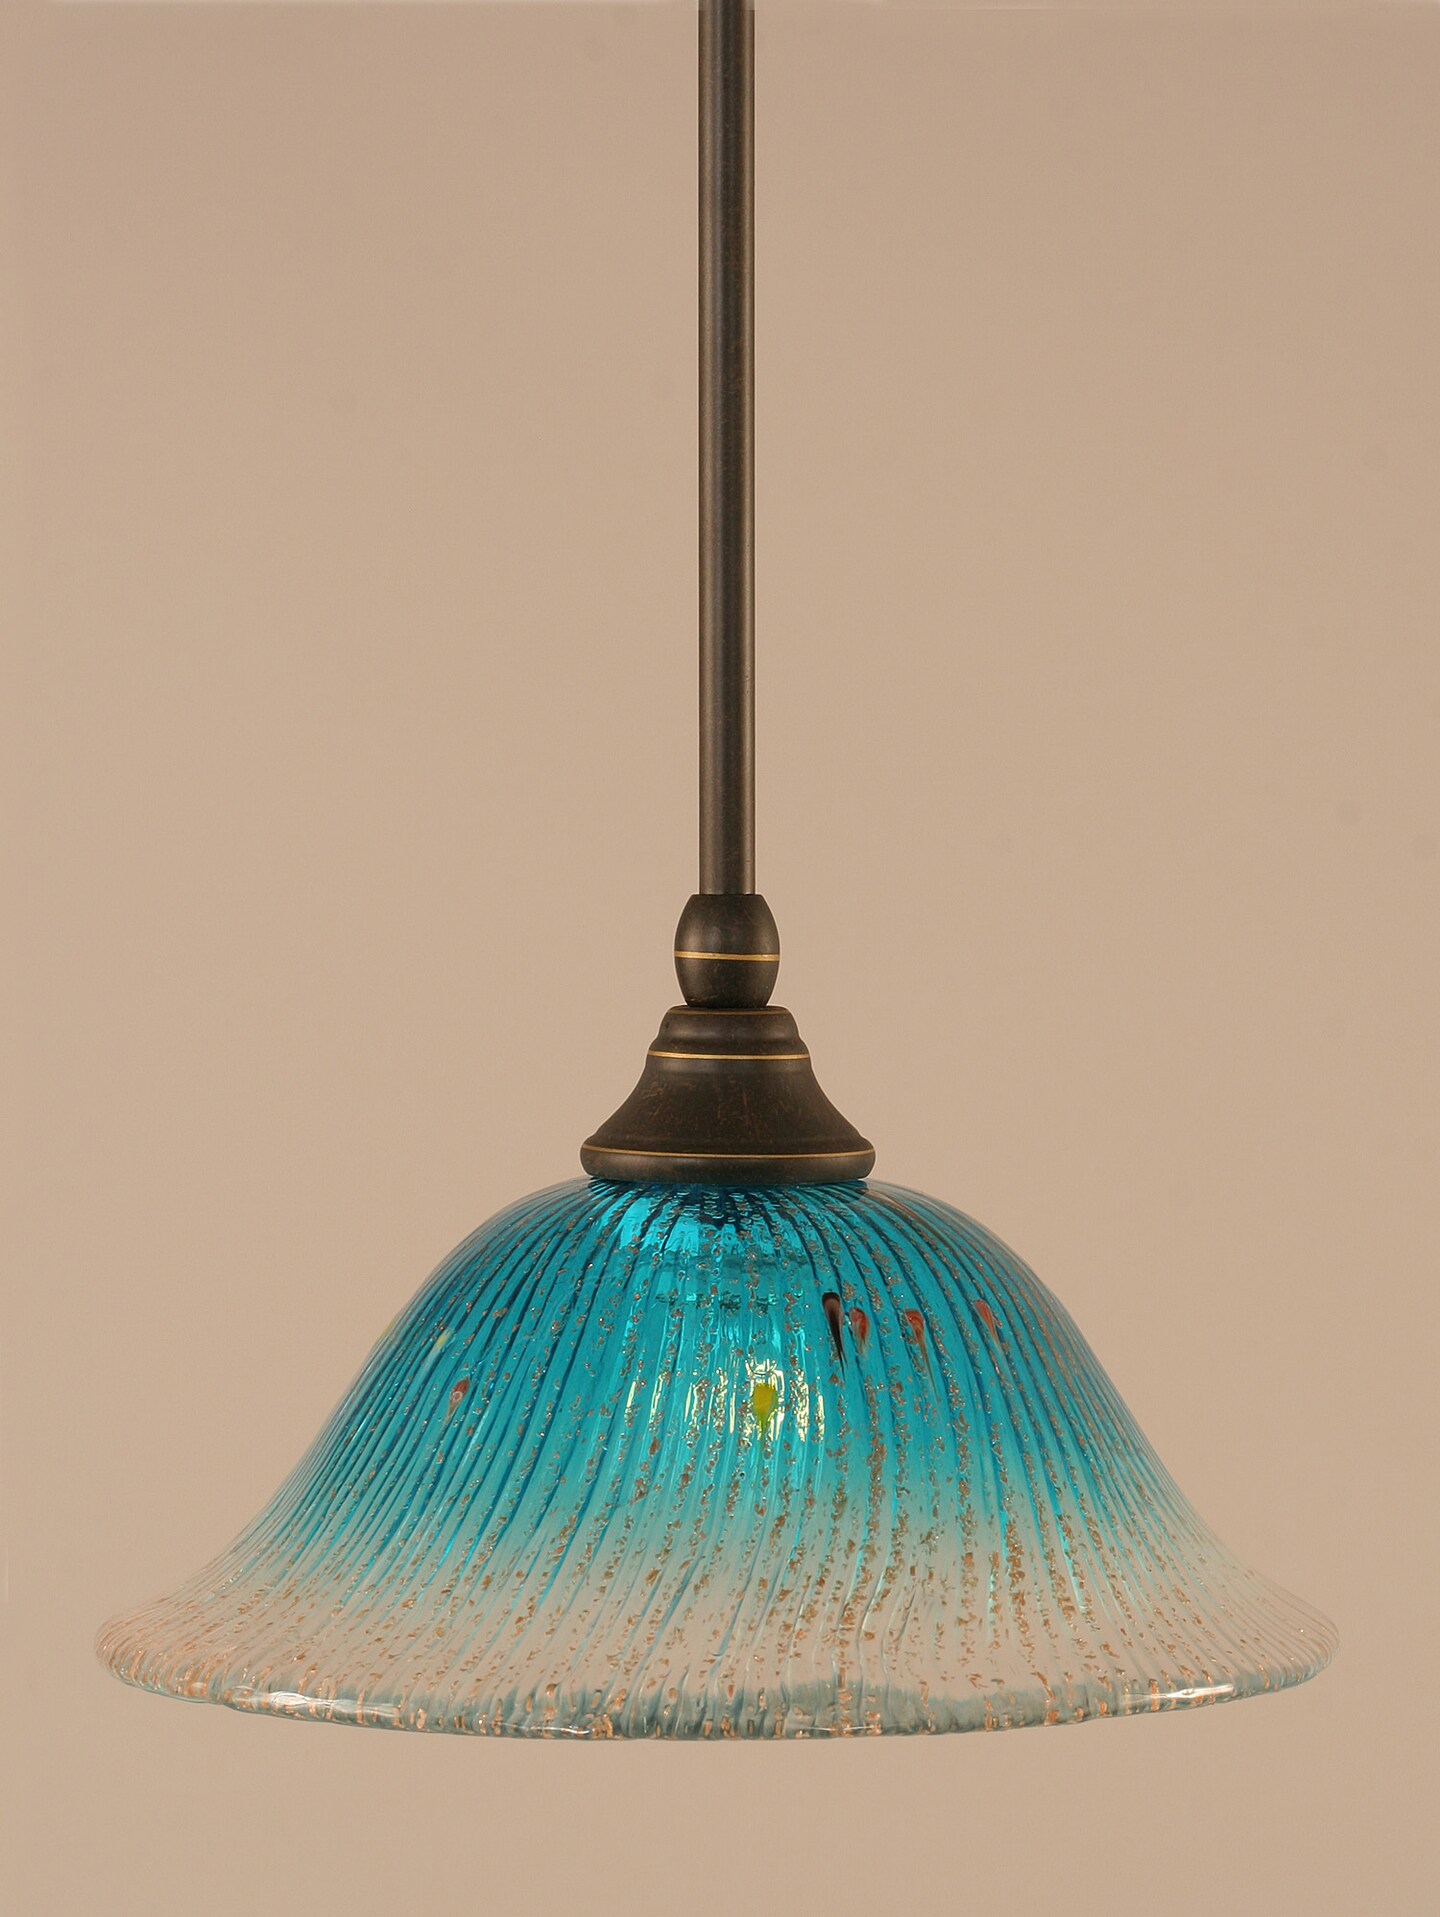 Stem Mini Pendant With Hang Straight Swivel Shown In Dark Granite Finish With 10 Teal Crystal Glass